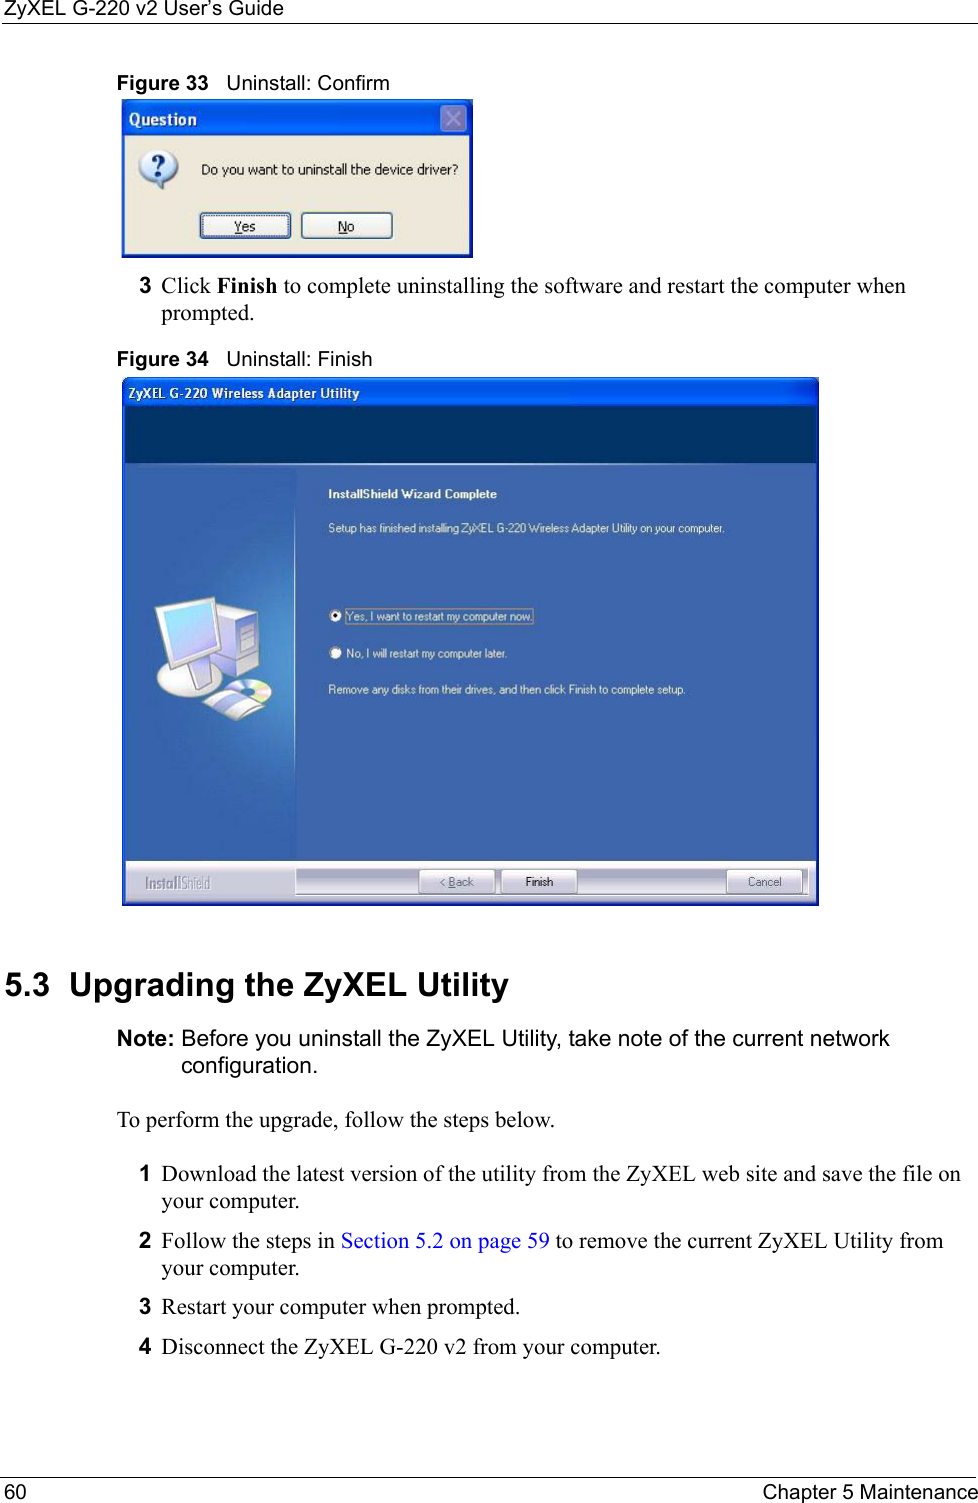 ZyXEL G-220 v2 User’s Guide60 Chapter 5 MaintenanceFigure 33   Uninstall: Confirm  3Click Finish to complete uninstalling the software and restart the computer when prompted.Figure 34   Uninstall: Finish 5.3  Upgrading the ZyXEL Utility Note: Before you uninstall the ZyXEL Utility, take note of the current network configuration.To perform the upgrade, follow the steps below.1Download the latest version of the utility from the ZyXEL web site and save the file on your computer.2Follow the steps in Section 5.2 on page 59 to remove the current ZyXEL Utility from your computer.3Restart your computer when prompted.4Disconnect the ZyXEL G-220 v2 from your computer.